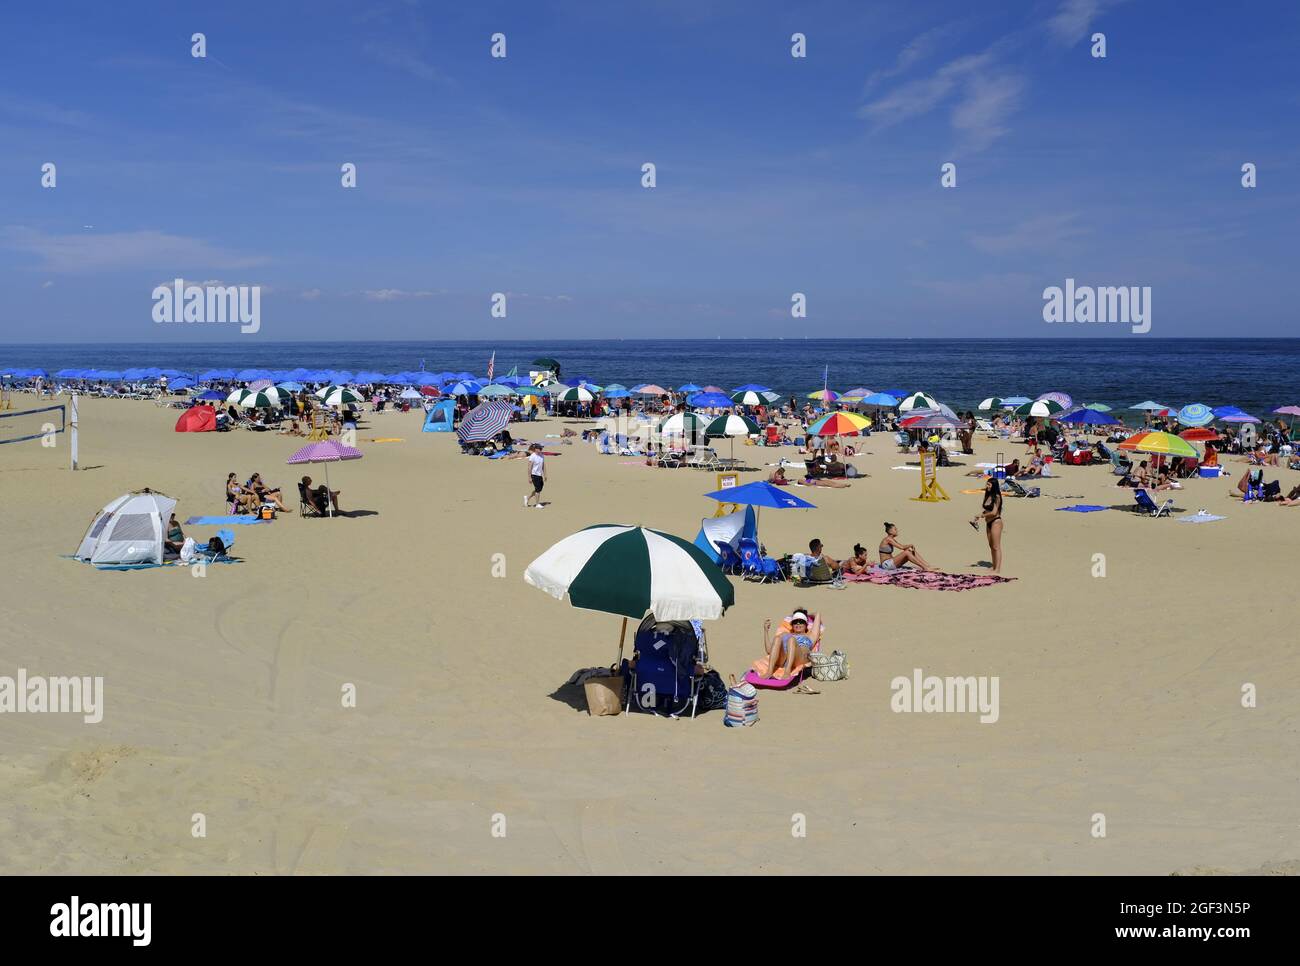 LONG BRANCH NJ, UNITED STATES - Aug 15, 2021: Large crowds enjoying a sunny beach day  in Long Branch along the New Jersey Shore Stock Photo